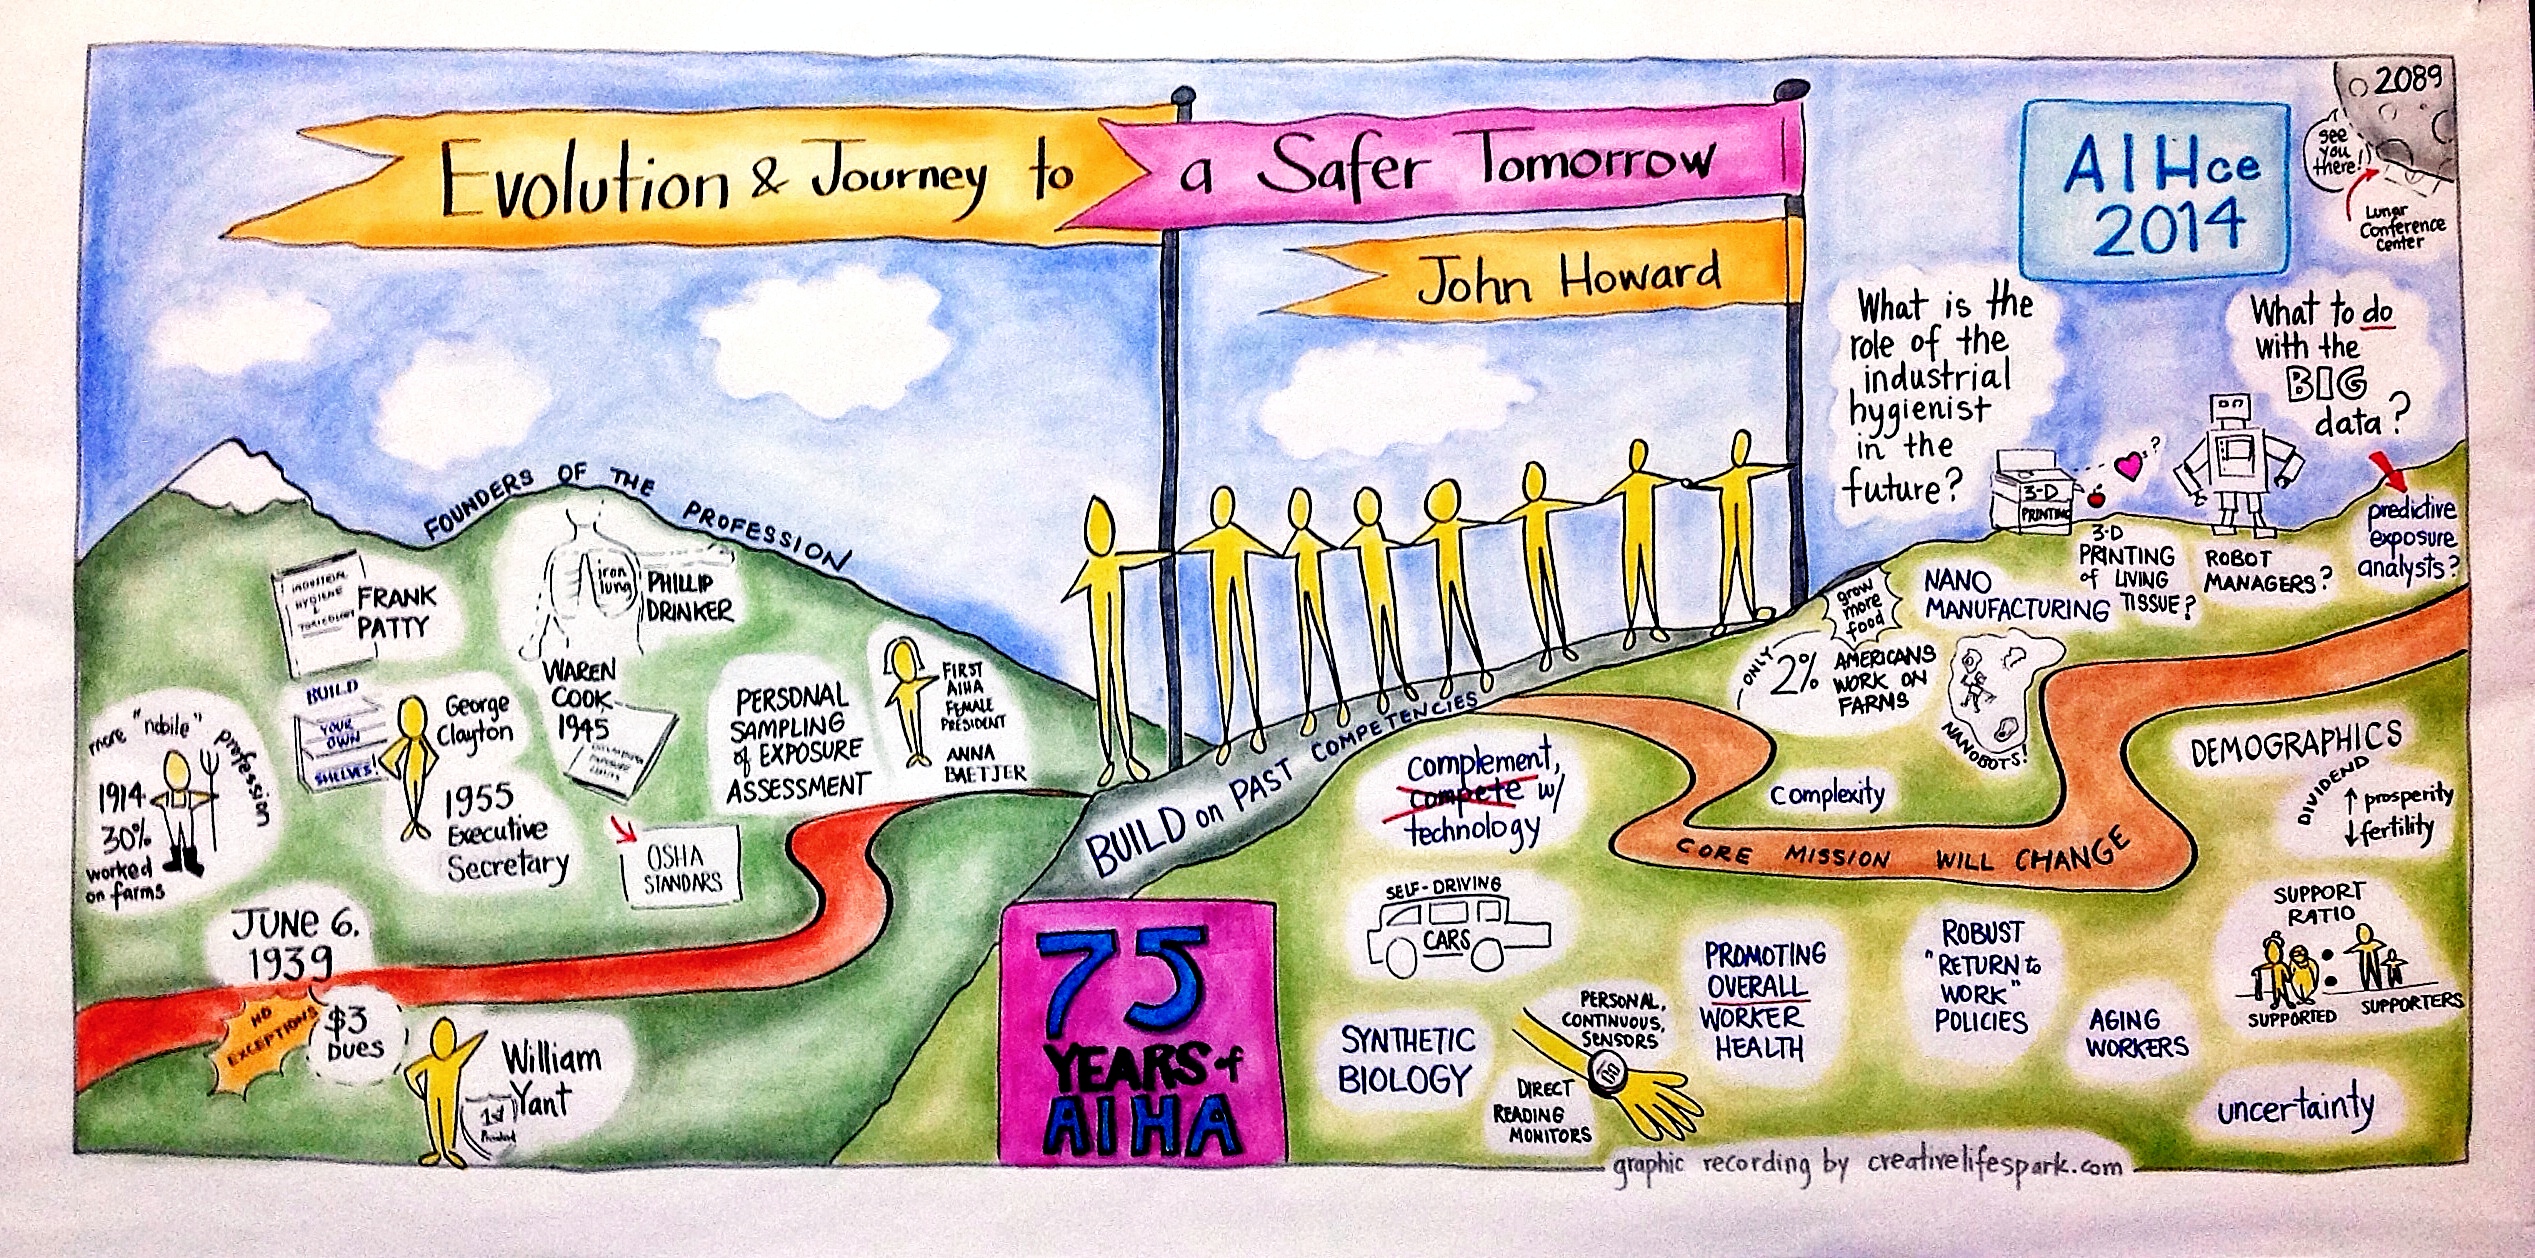 Graphic Recording for AIHCe by Creative Catalyst, Katherine Torrini